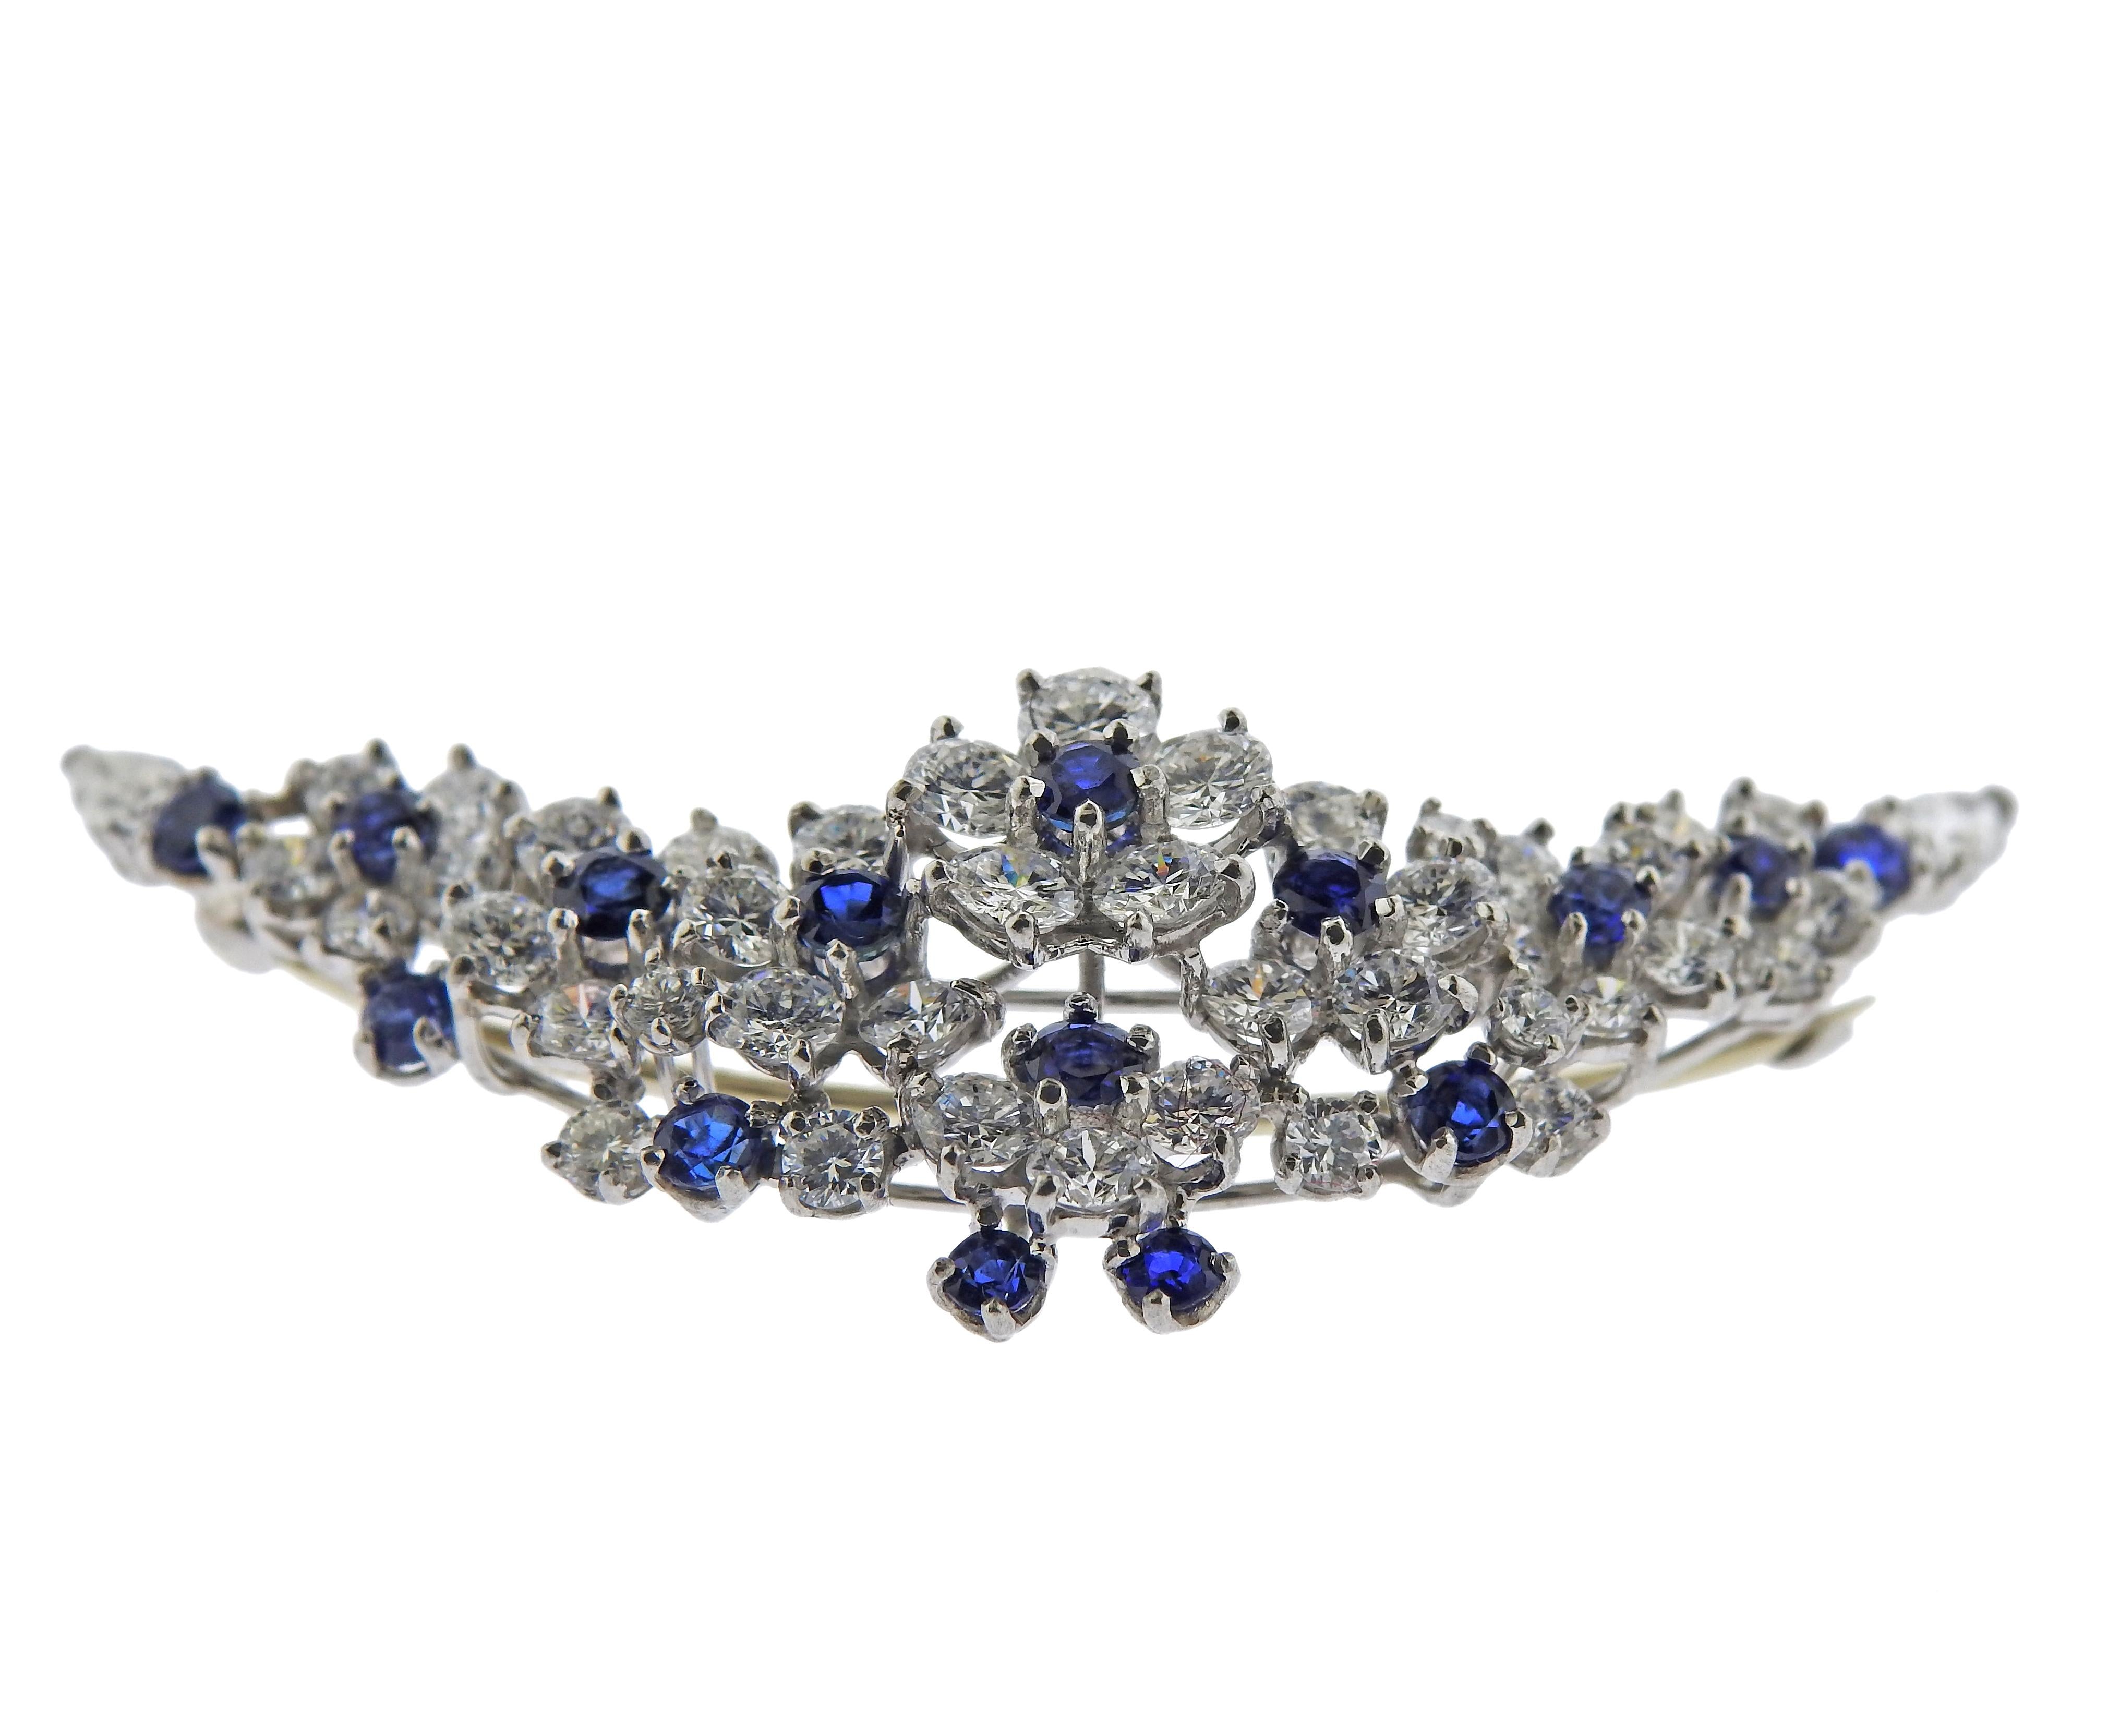 Platinum floral brooch by Oscar Heyman Bros., with blue sapphires and approx. 4.50ctw in diamonds. Brooch measures 2.25